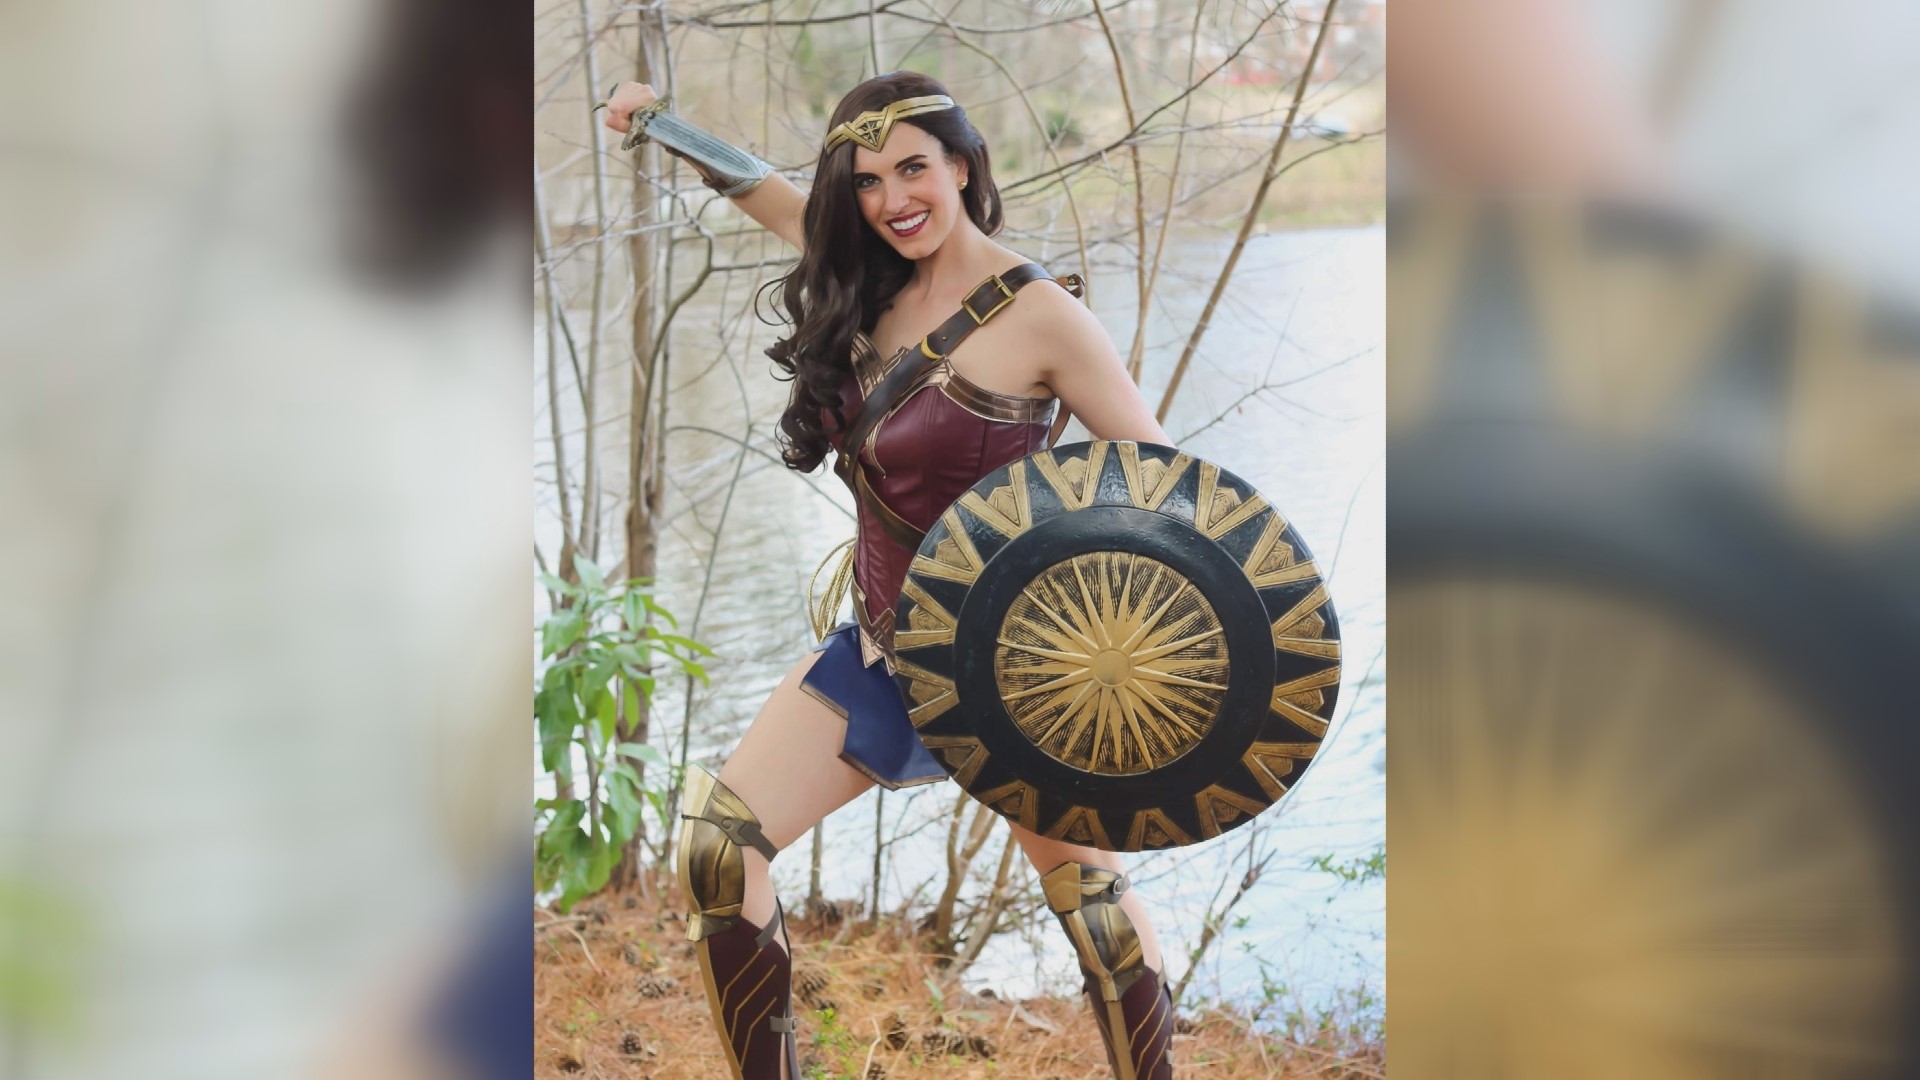 This is Angela O'Brian's fifth time going to DragonCon. Her favorite character to cosplay is Wonder Woman.